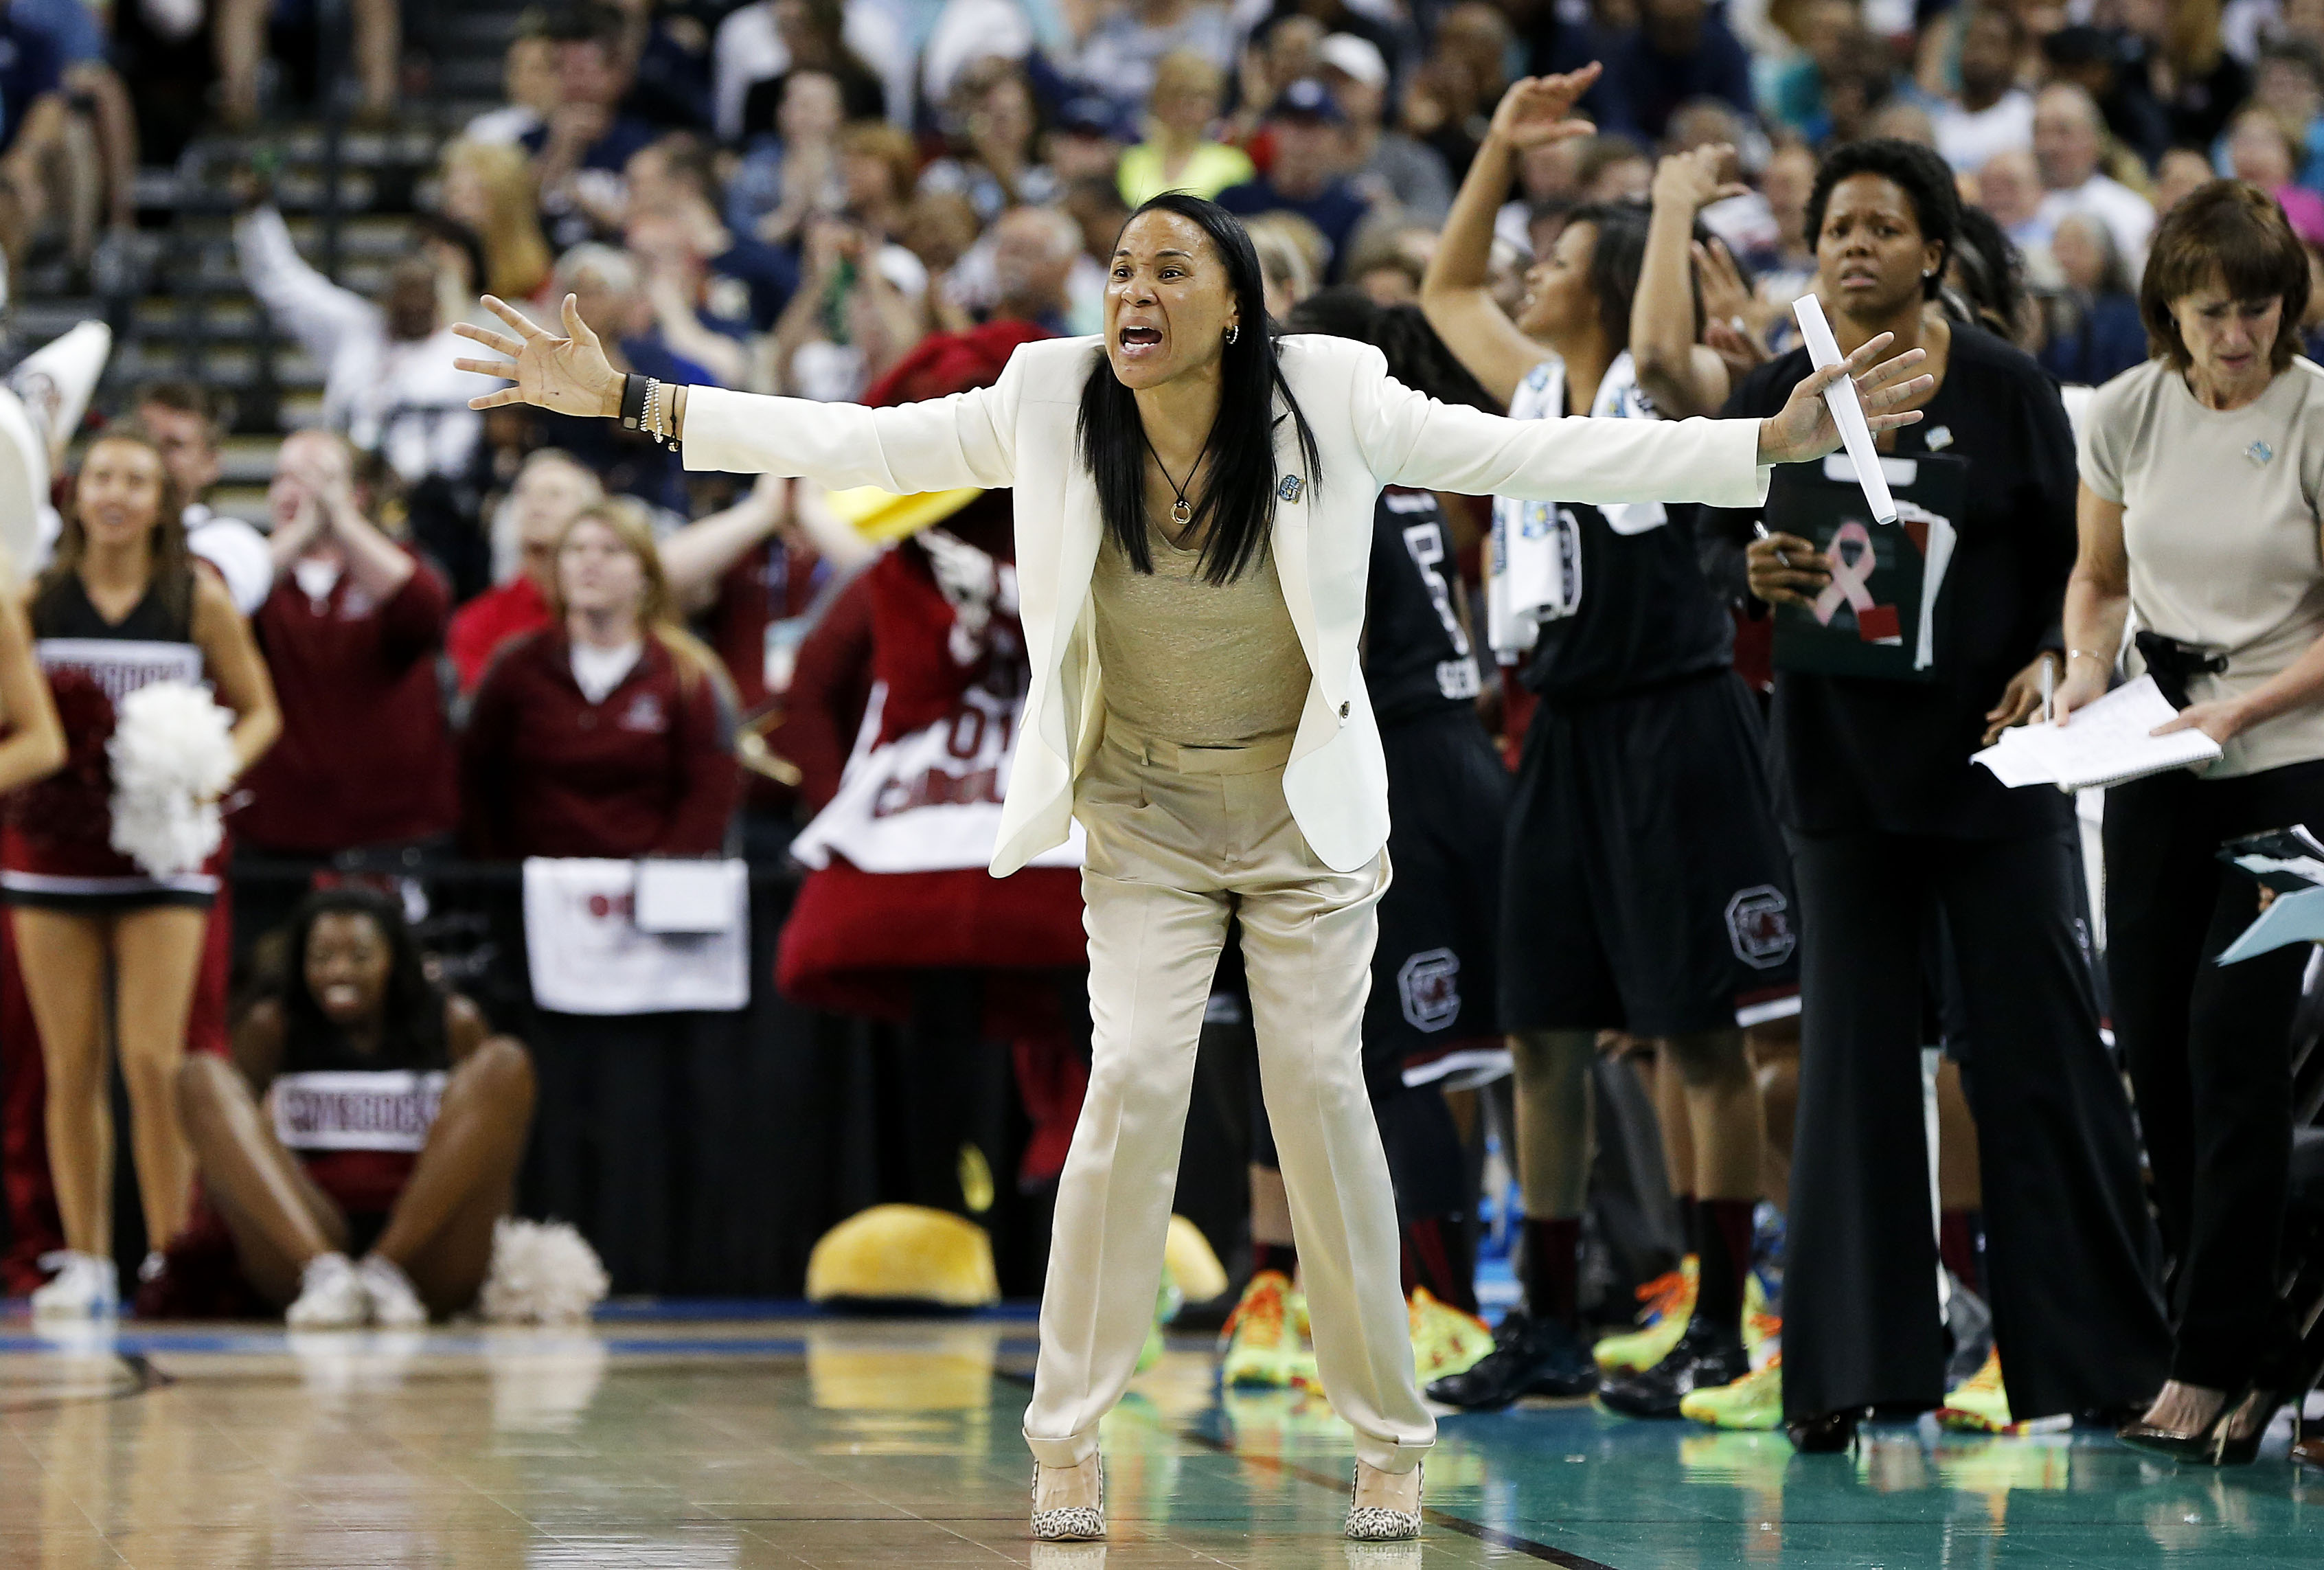 Staley introduced as coach of U.S. national women's hoops team